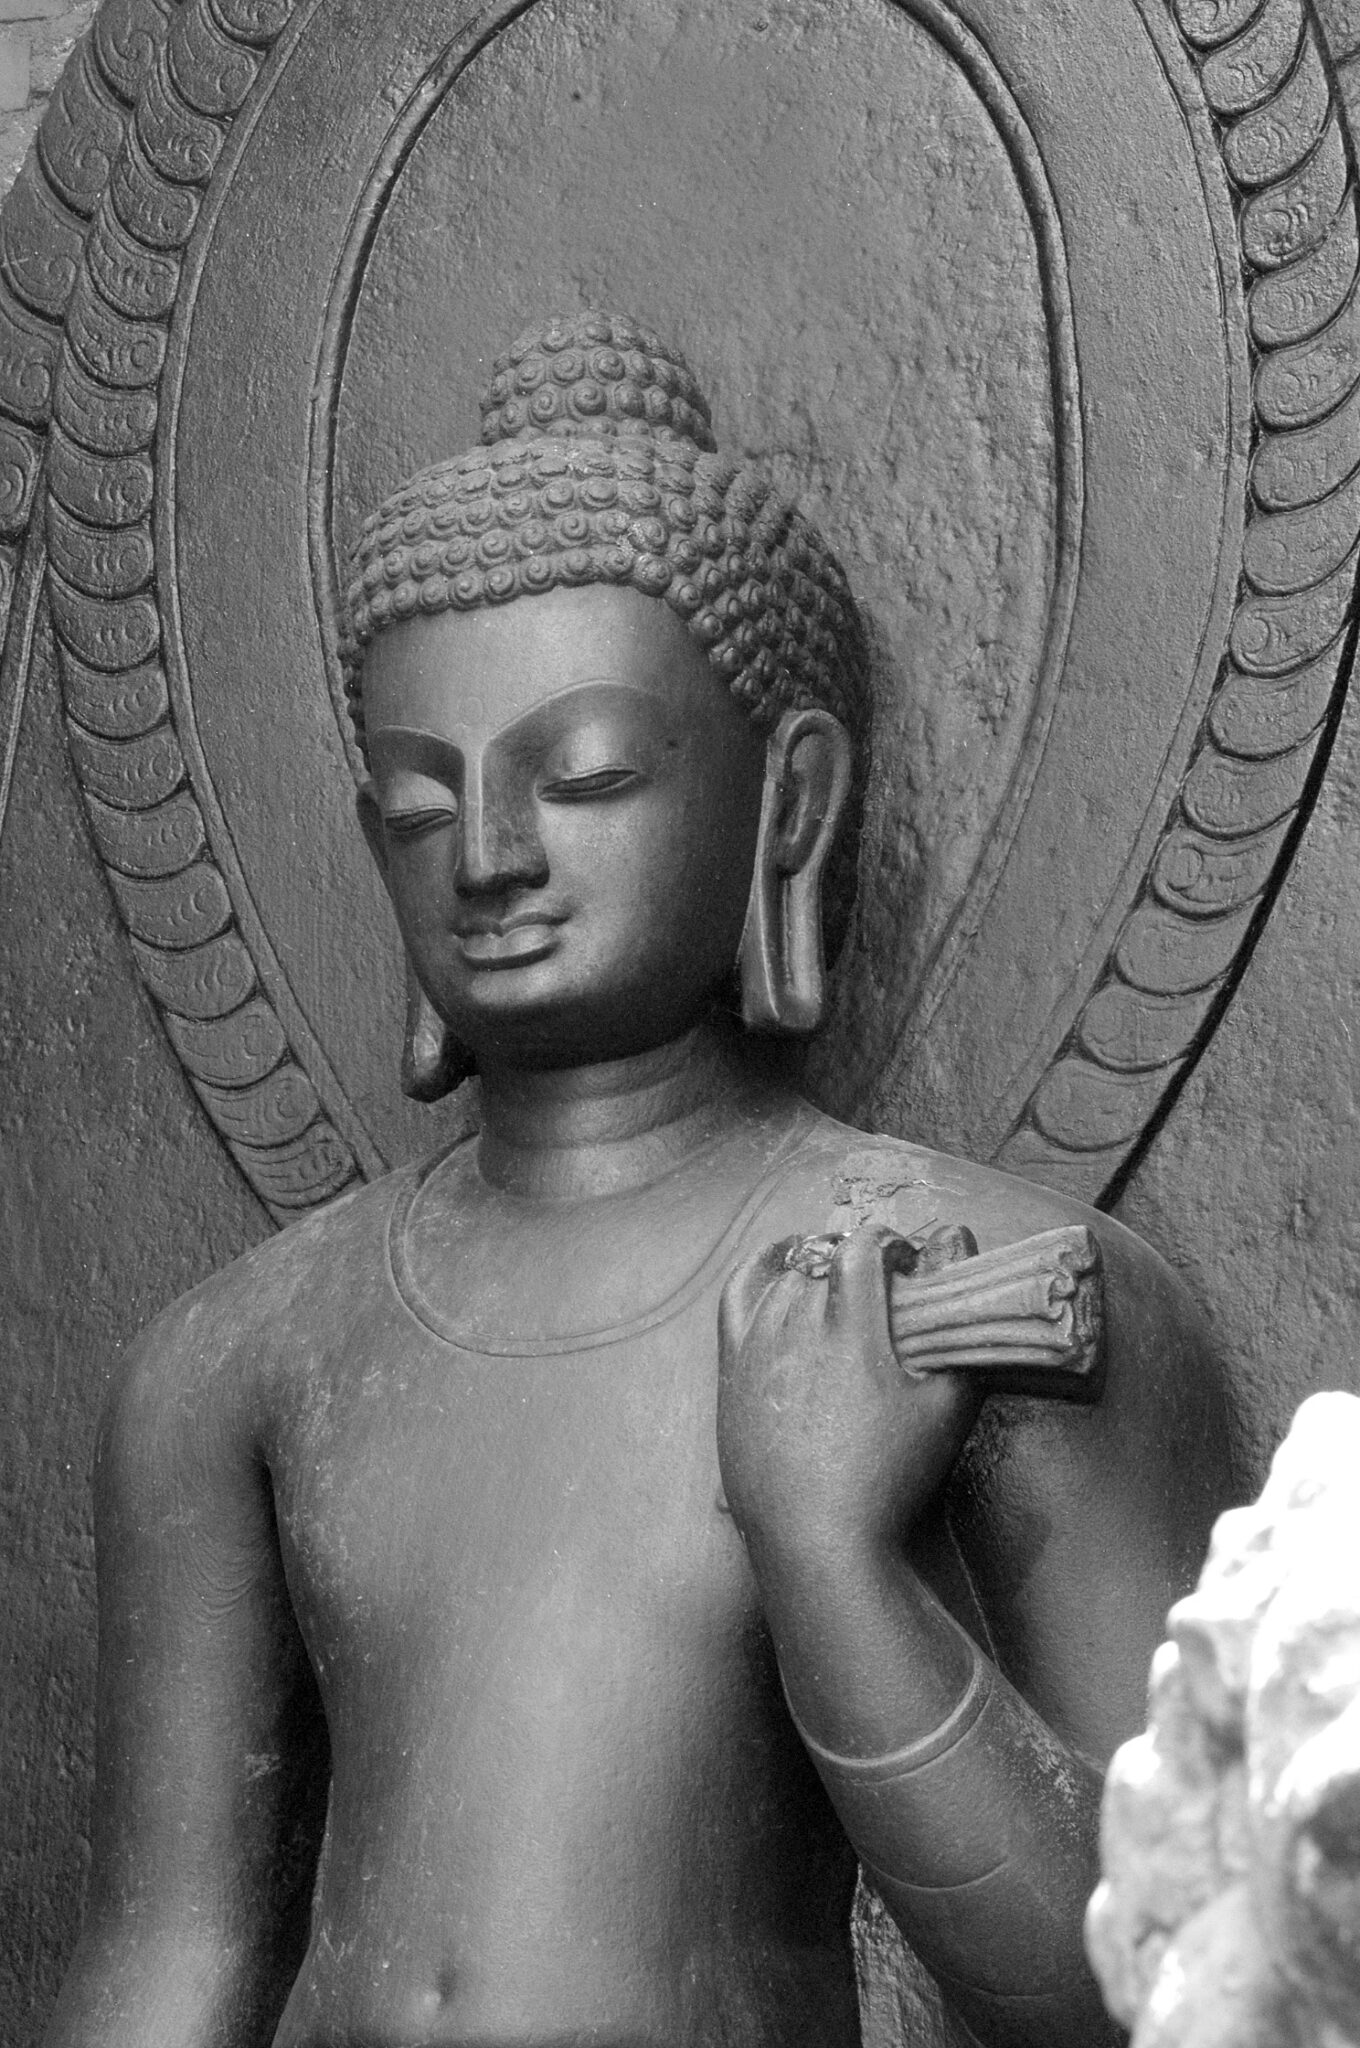 Black and white photograph of torso and head of Buddha holding implement in right hand at shoulder level